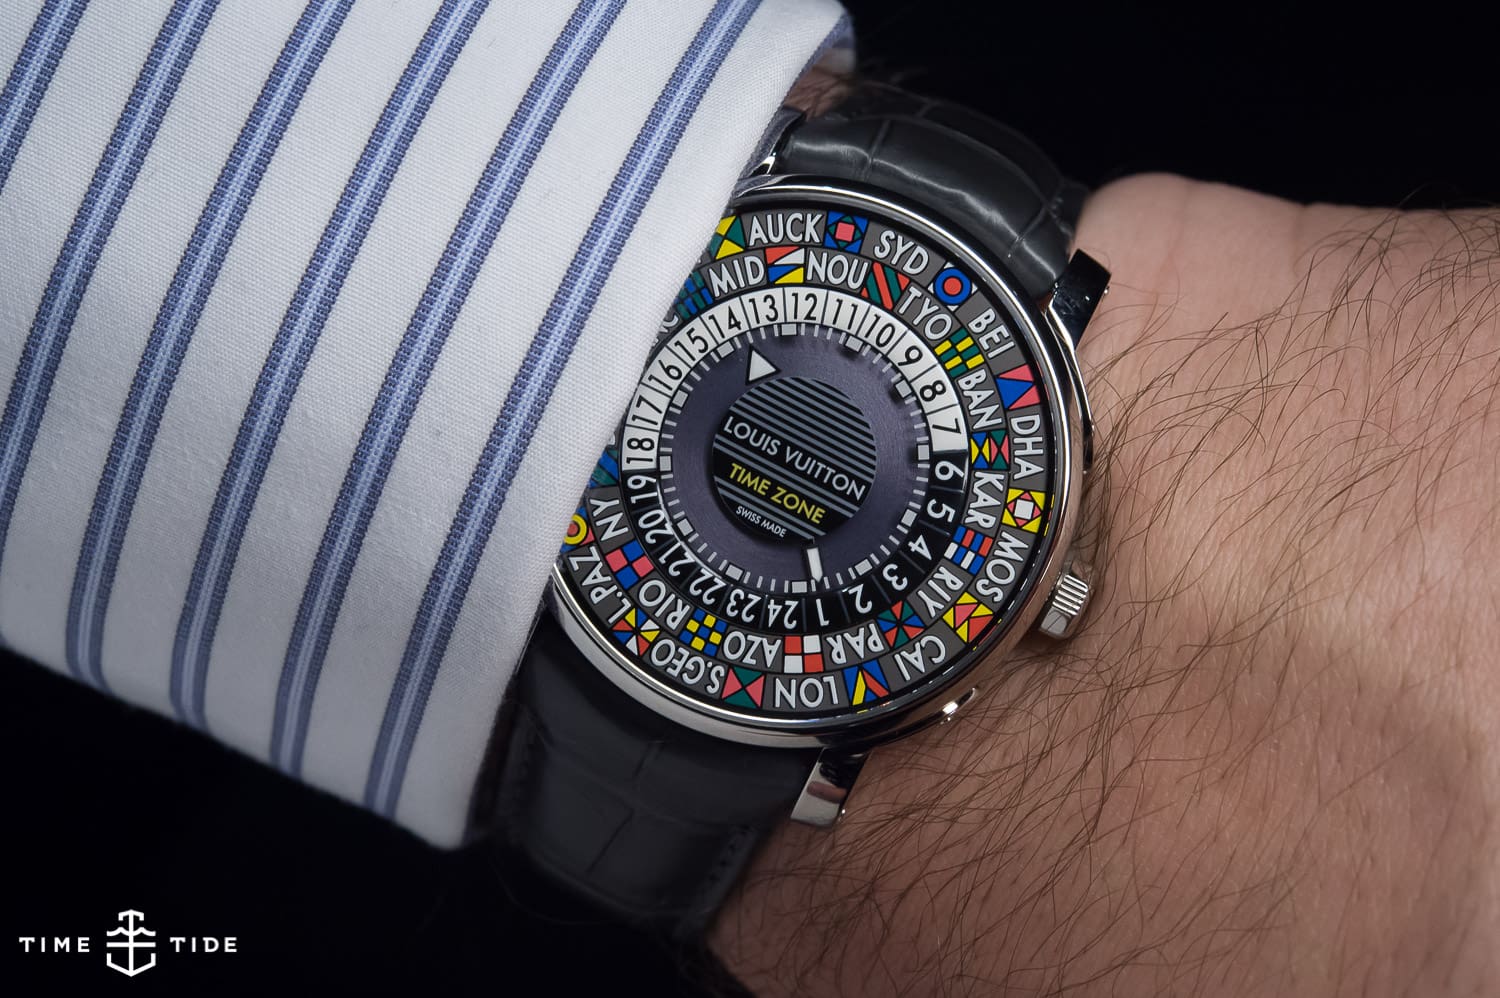 This Louis Vuitton Wristwatch is Gaudy, Confusing and Absolutely